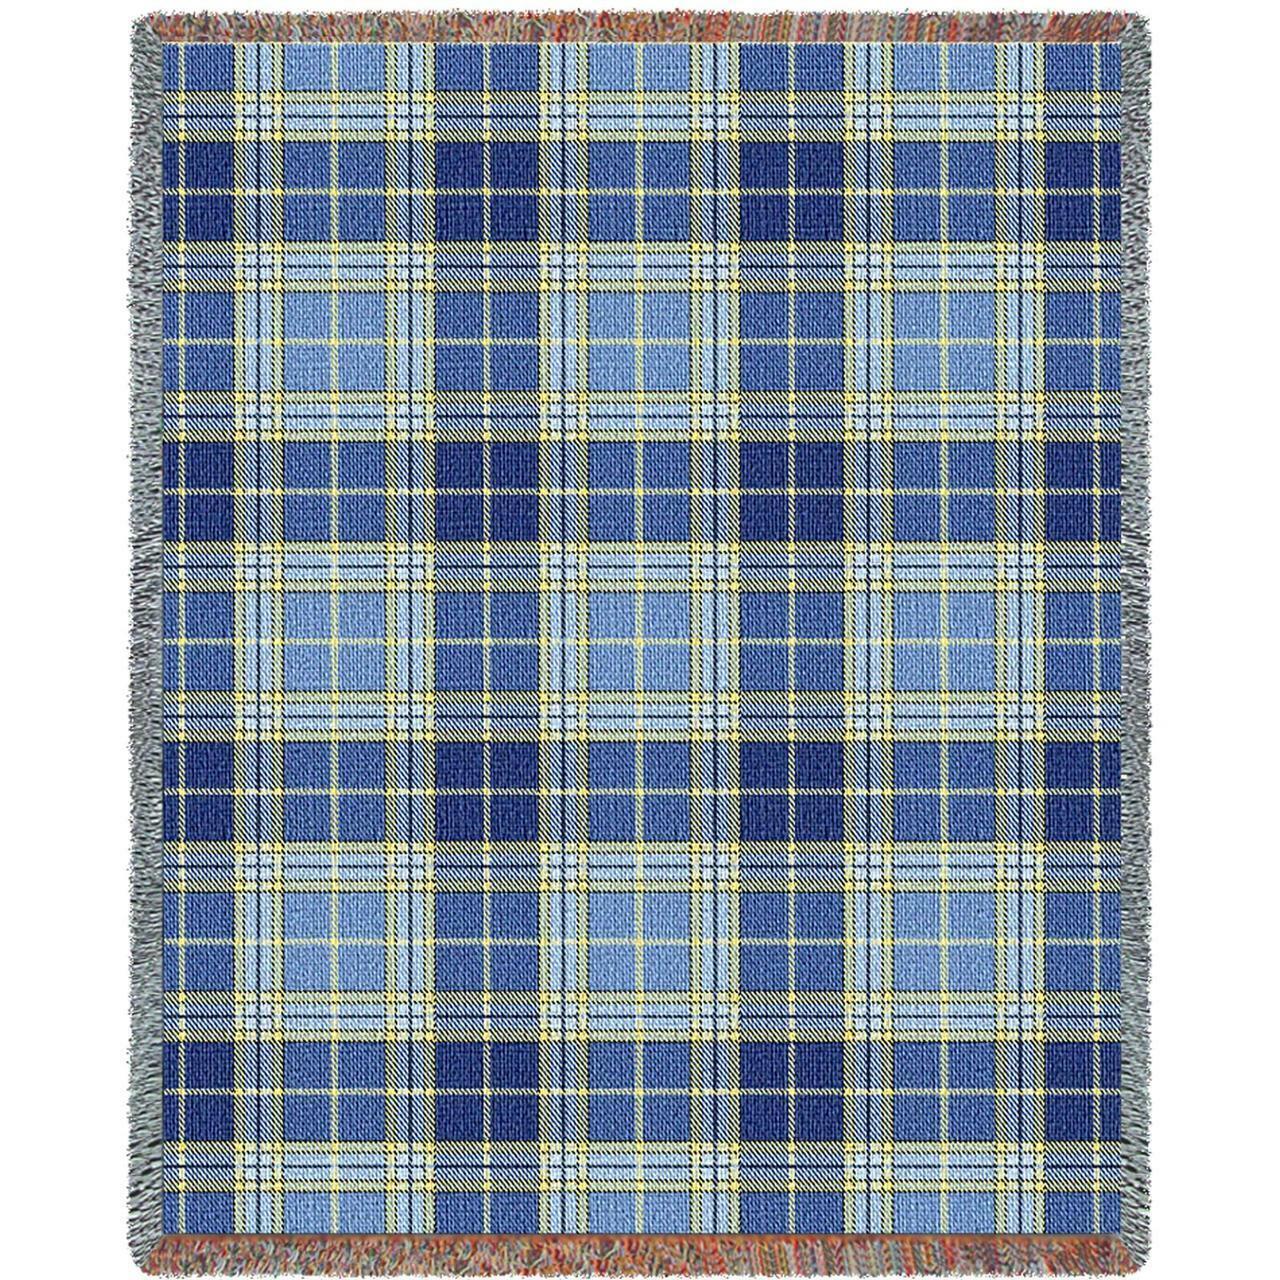 Primary image for 72x54 BLUE BELL Plaid Tapestry Afghan Throw Blanket